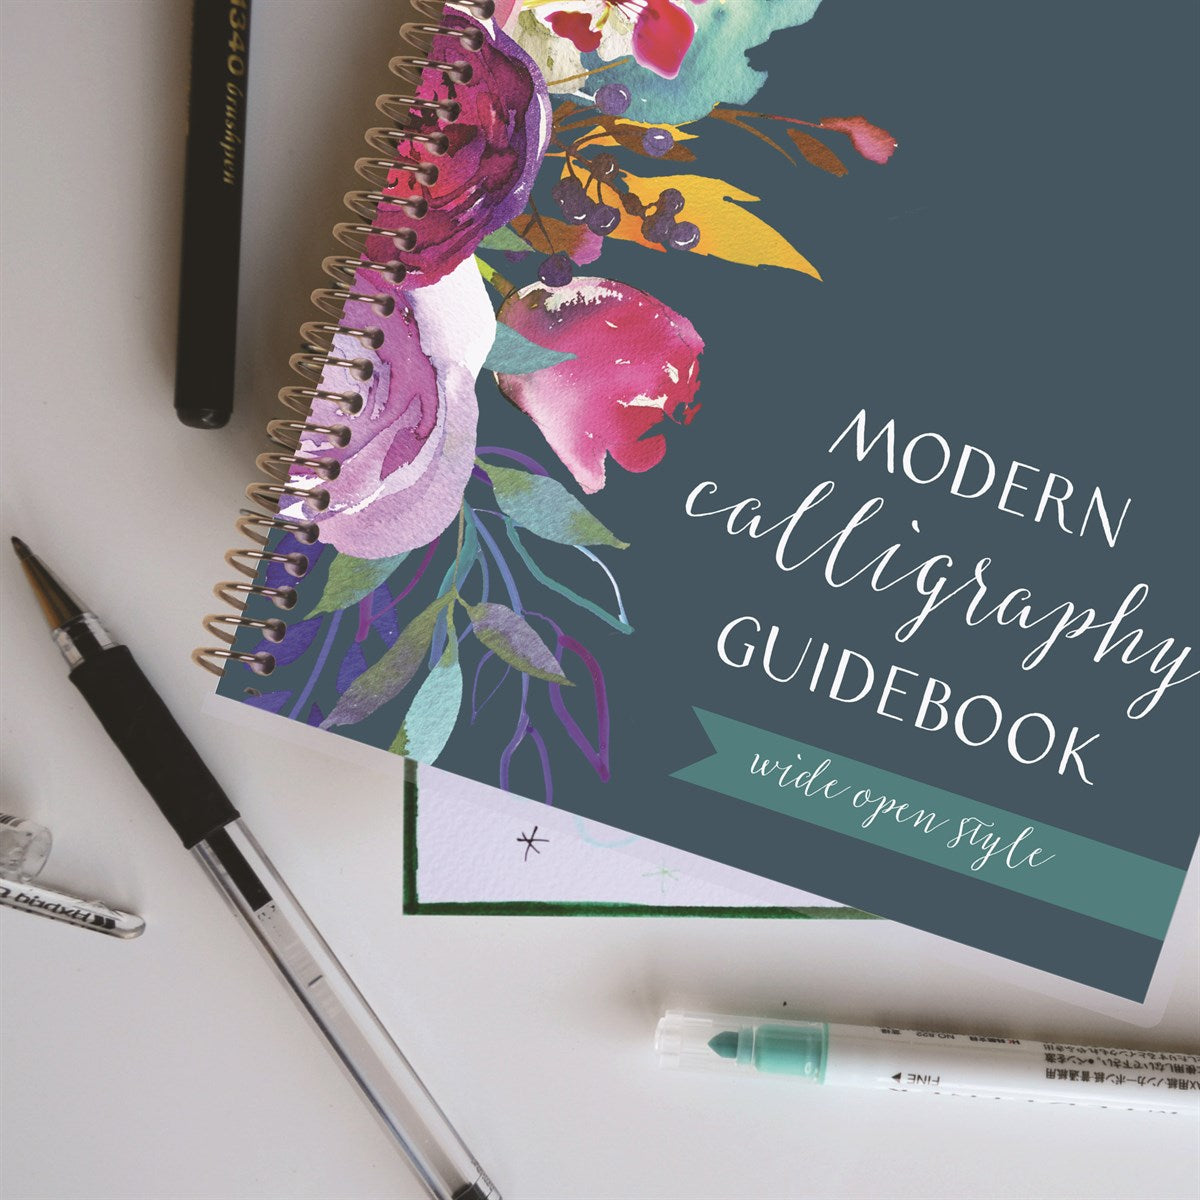 Advanced Modern Calligraphy Practice Workbook DIY by À L'AISE